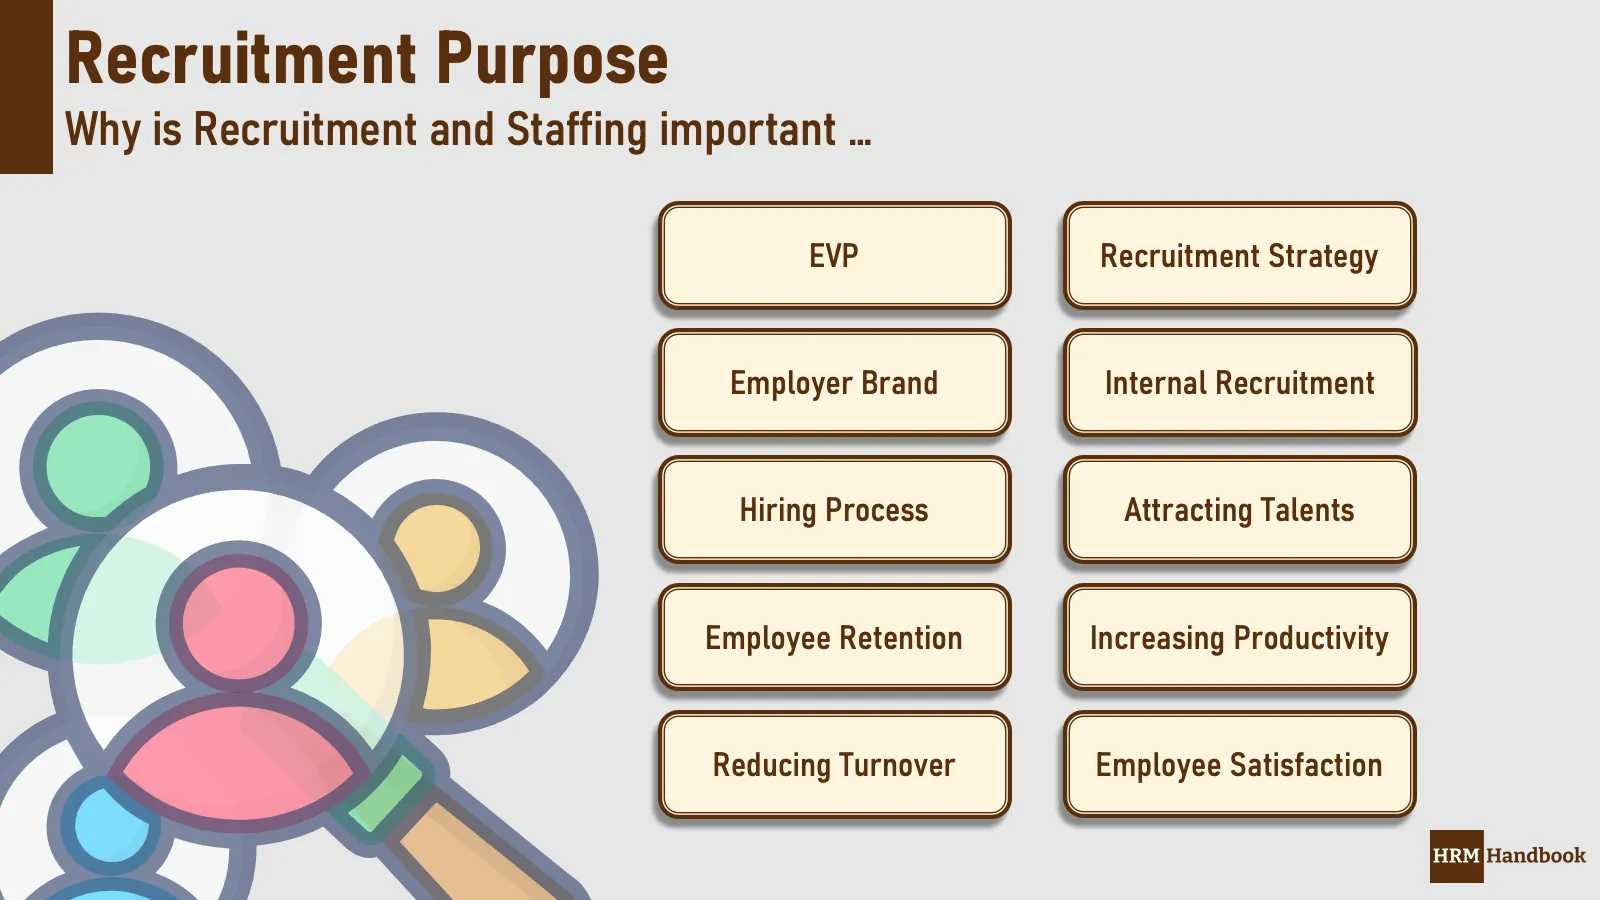 Purpose of Recruitment and Staffing